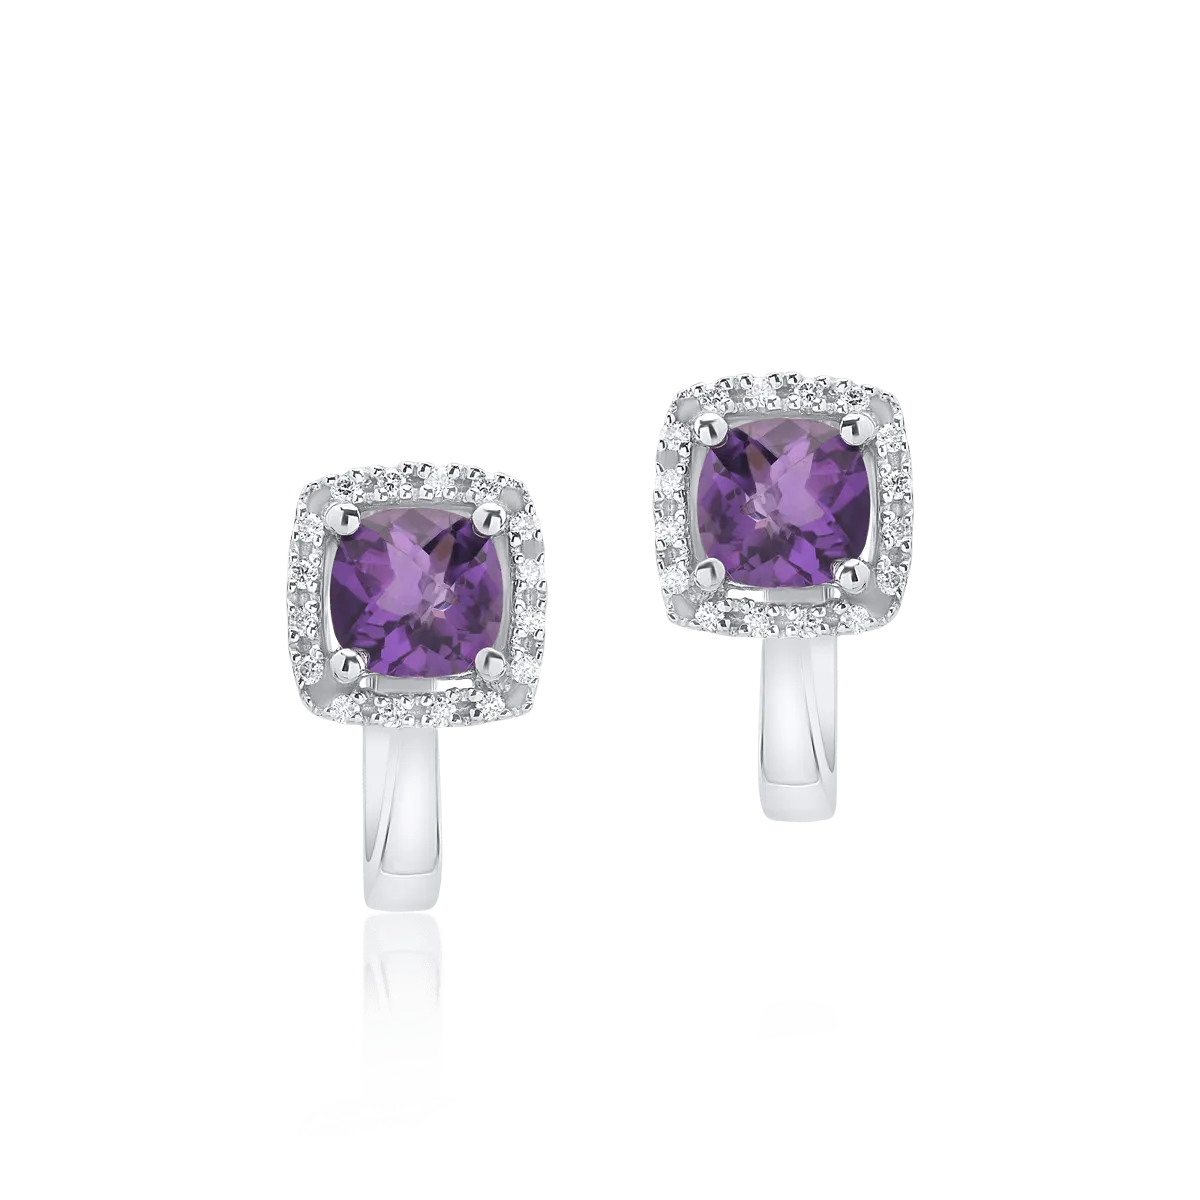 14K white gold earrings with 0.965ct amethysts and 0.088ct diamonds